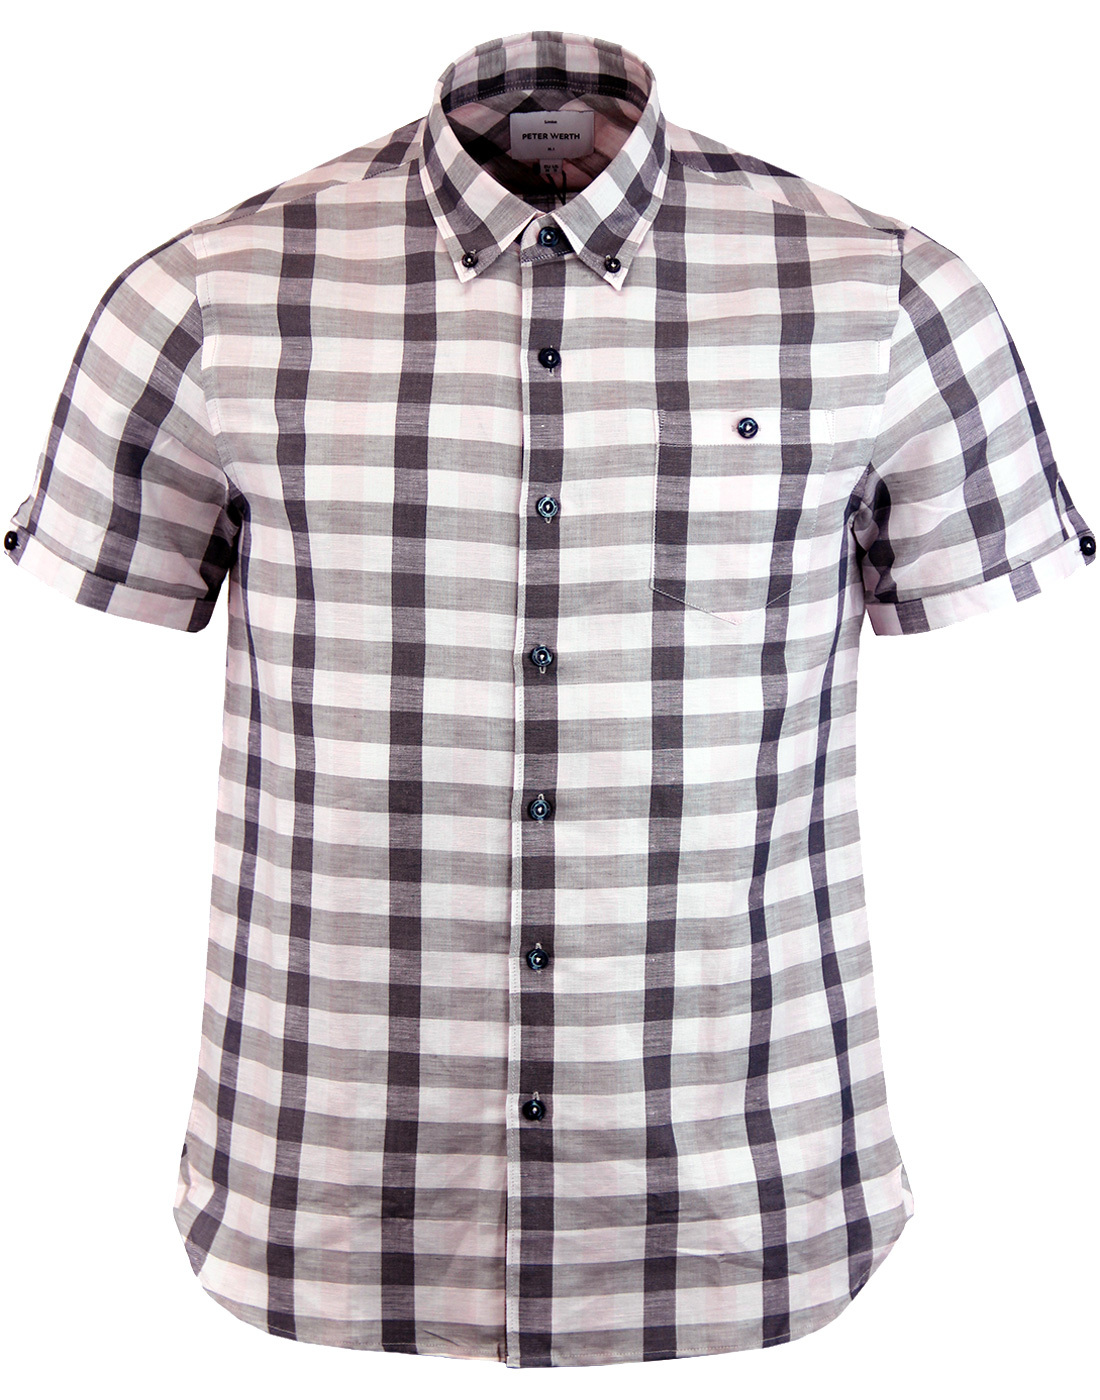 PETER WERTH Worker Retro Check Linen Shirt in Pale Pink